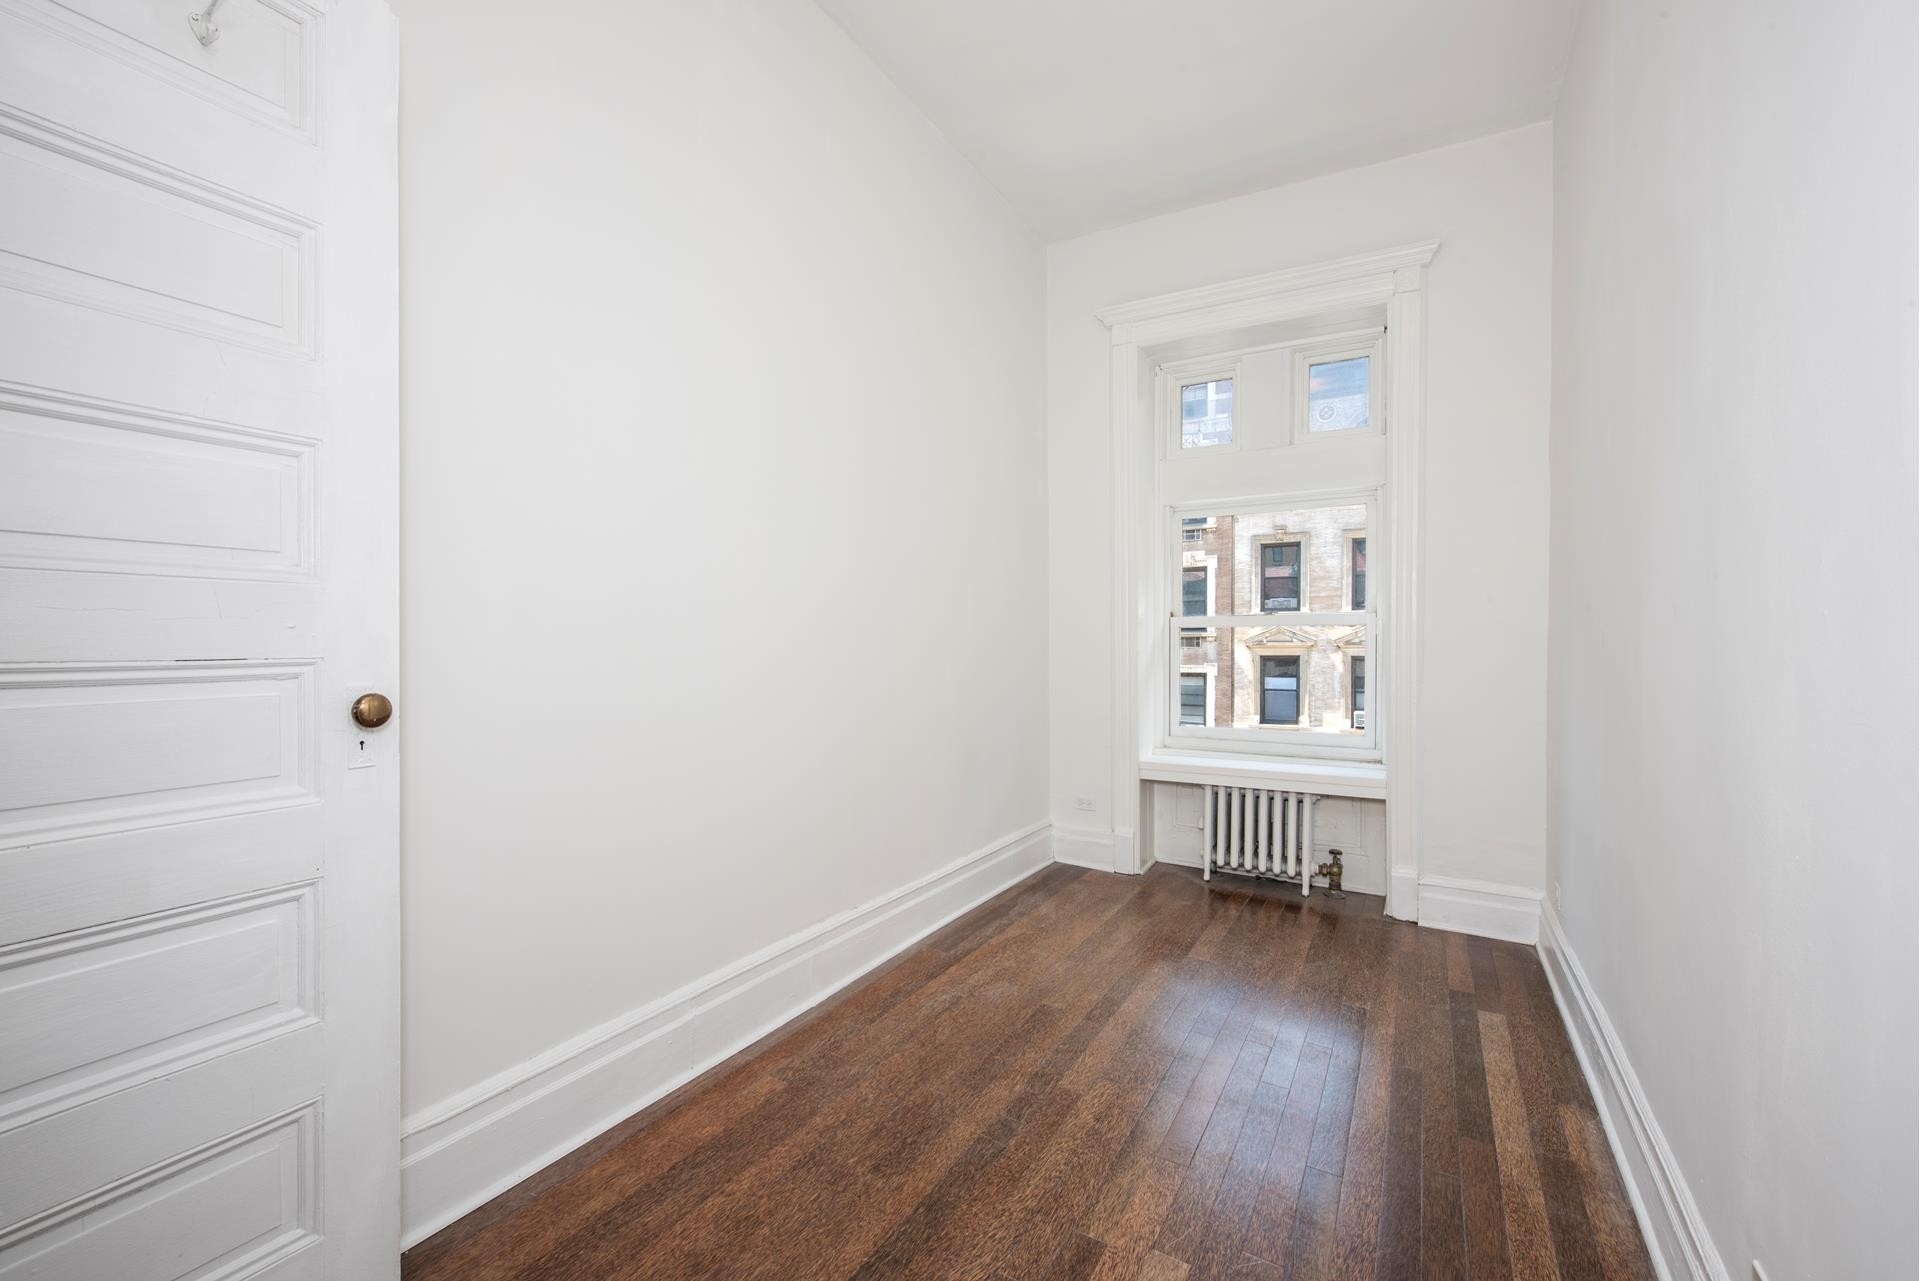 4. Co-op Properties for Sale at Townsend Mews, 335 W 85TH ST, 4A Upper West Side, New York, NY 10024